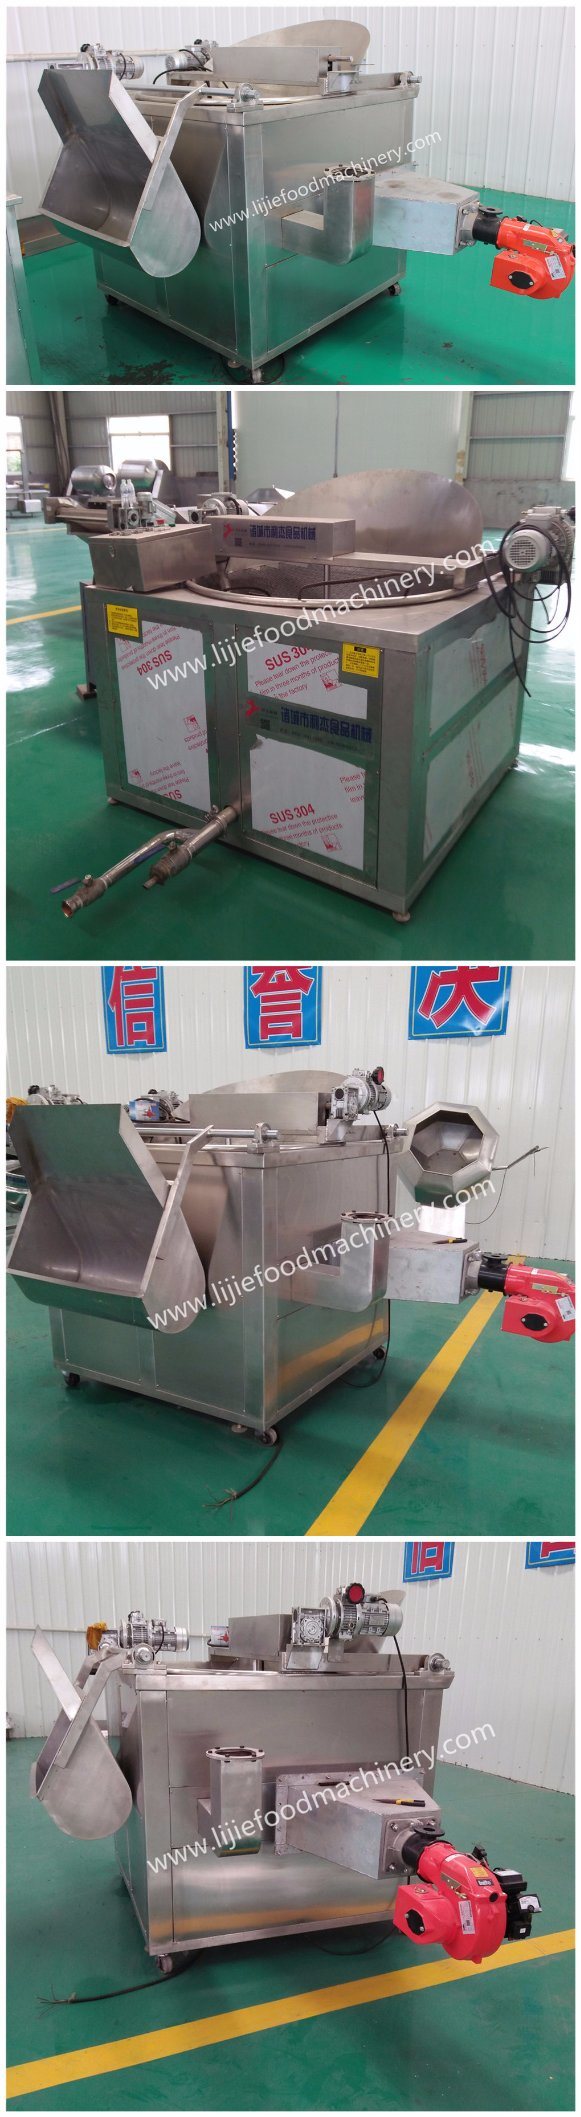 Stainless Steel Commercial Plantain Chips Fryer